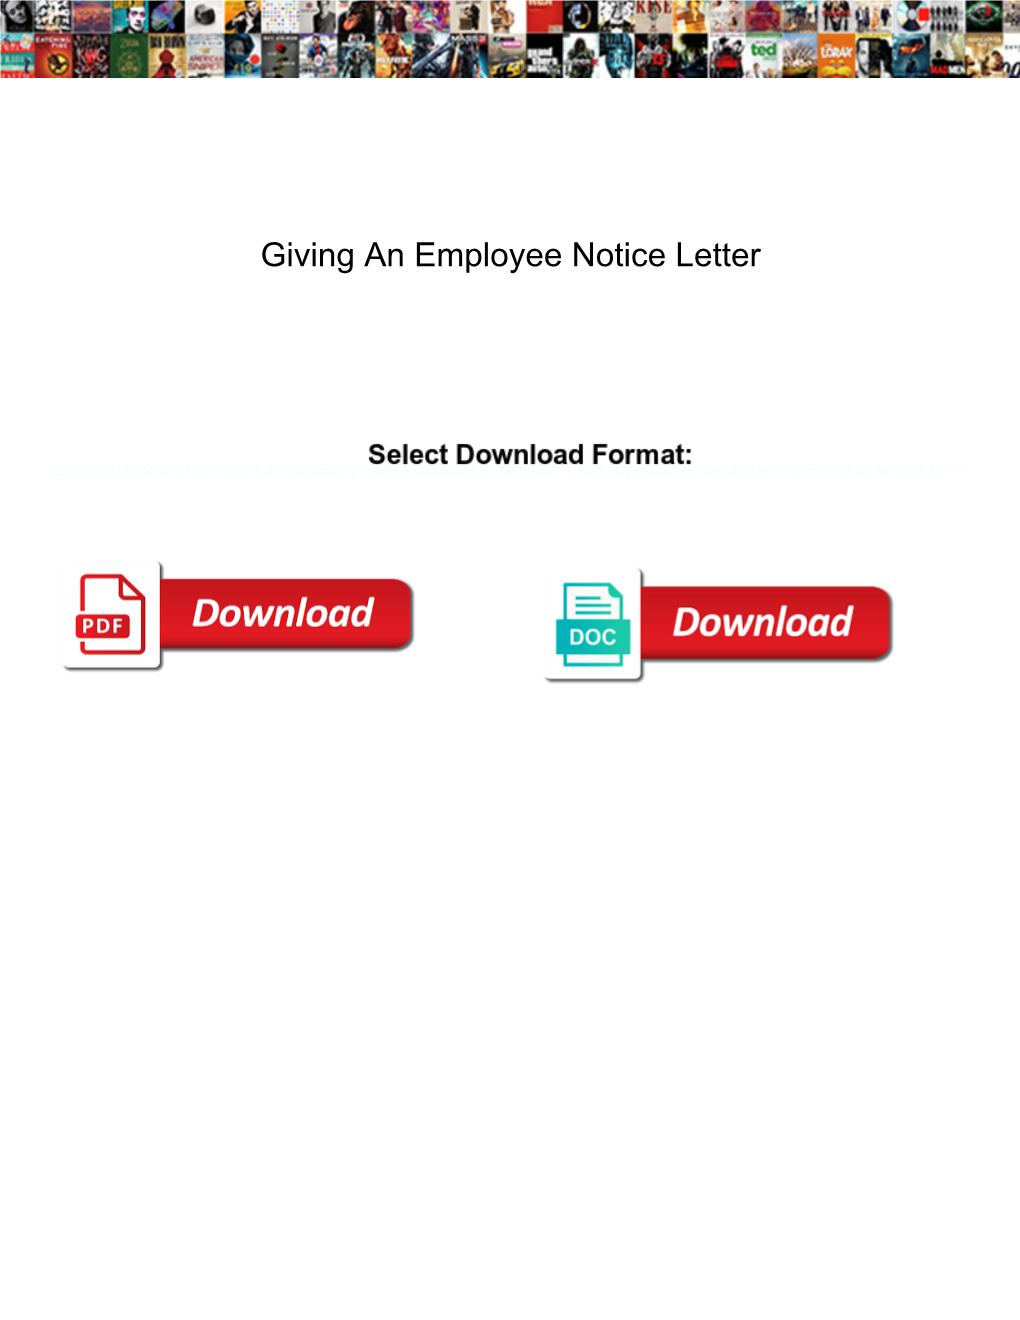 Giving an Employee Notice Letter